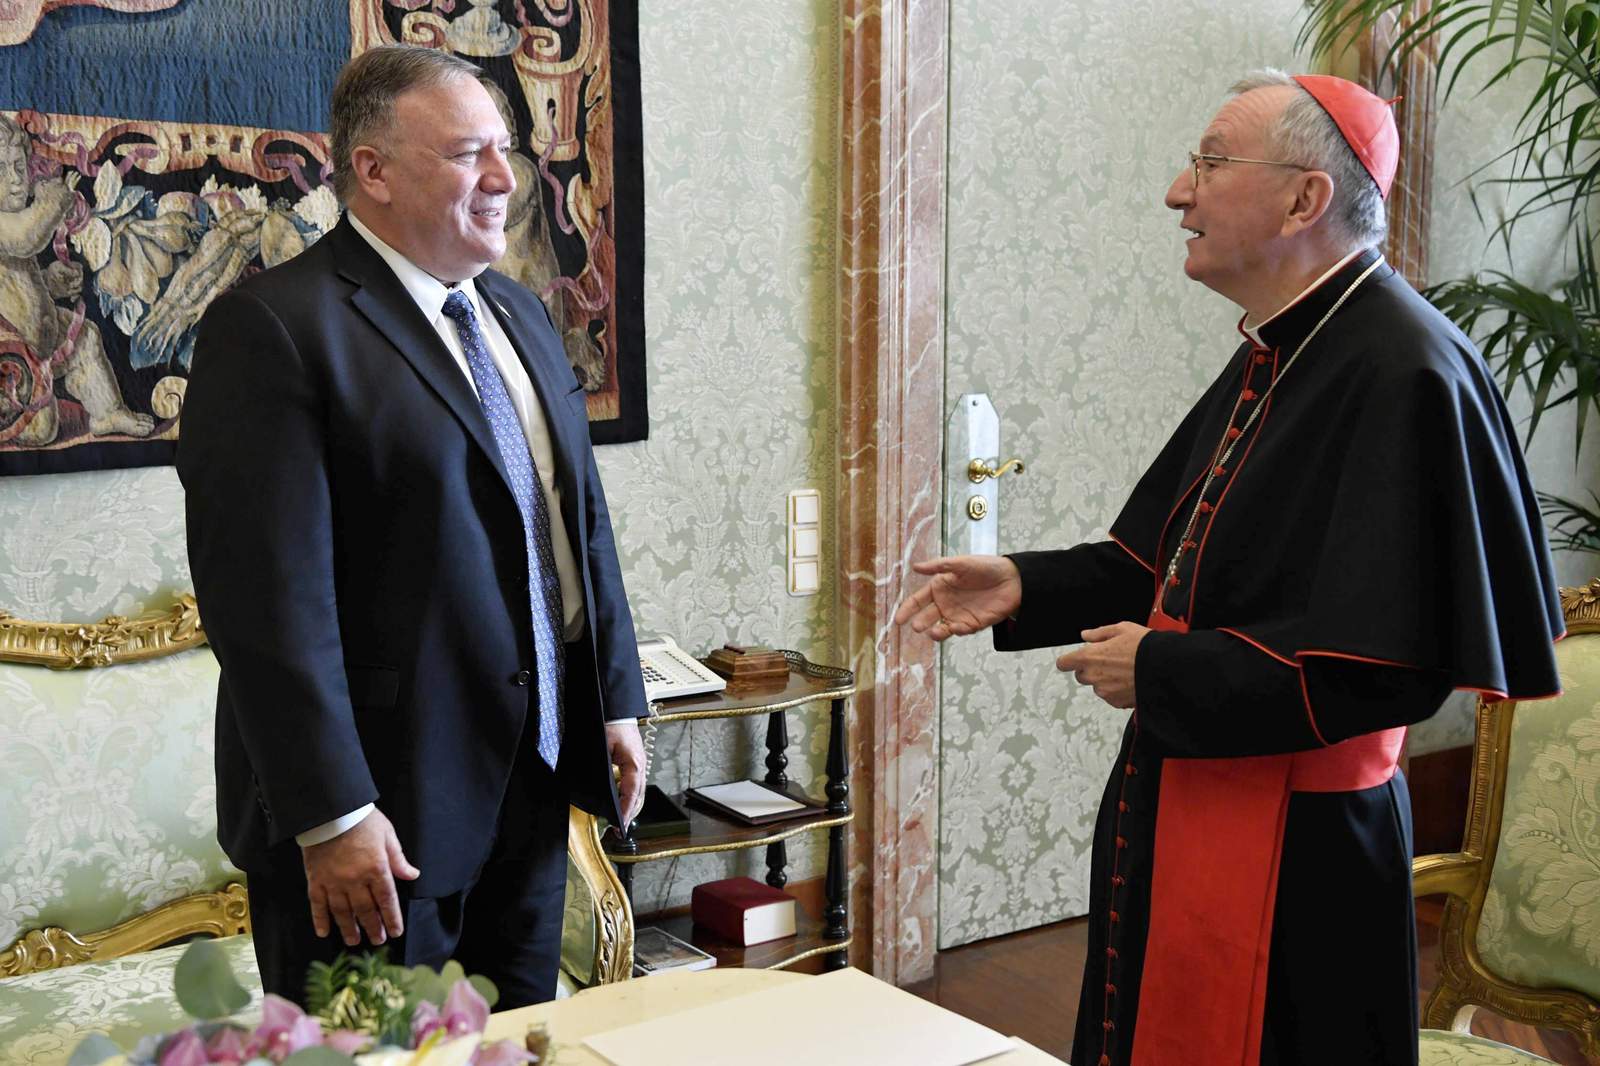 Pompeo, Vatican clash over China after tensions spill out